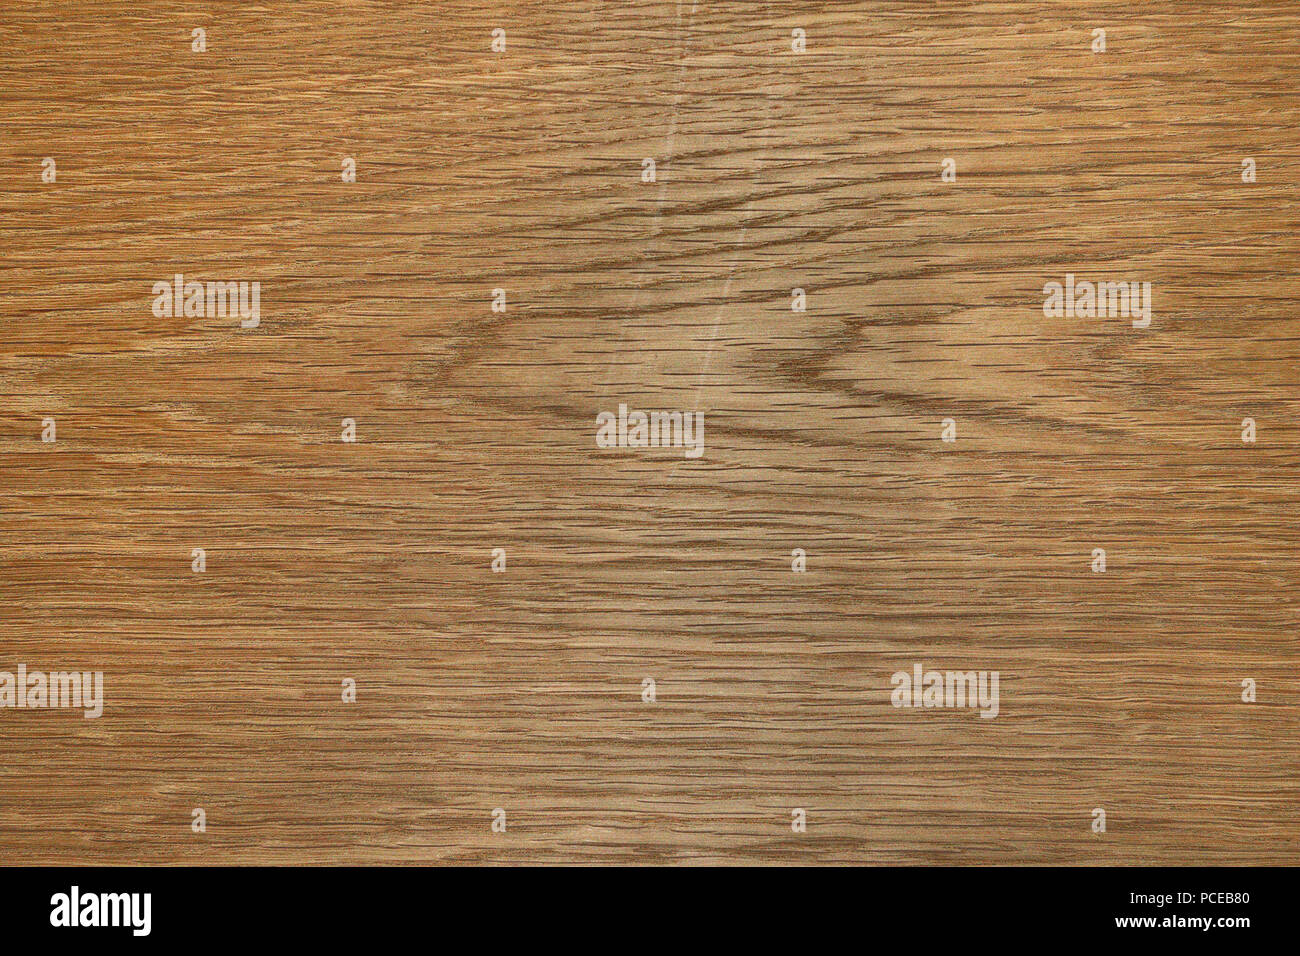 brown veneer surface, wooden texture for your design Stock Photo